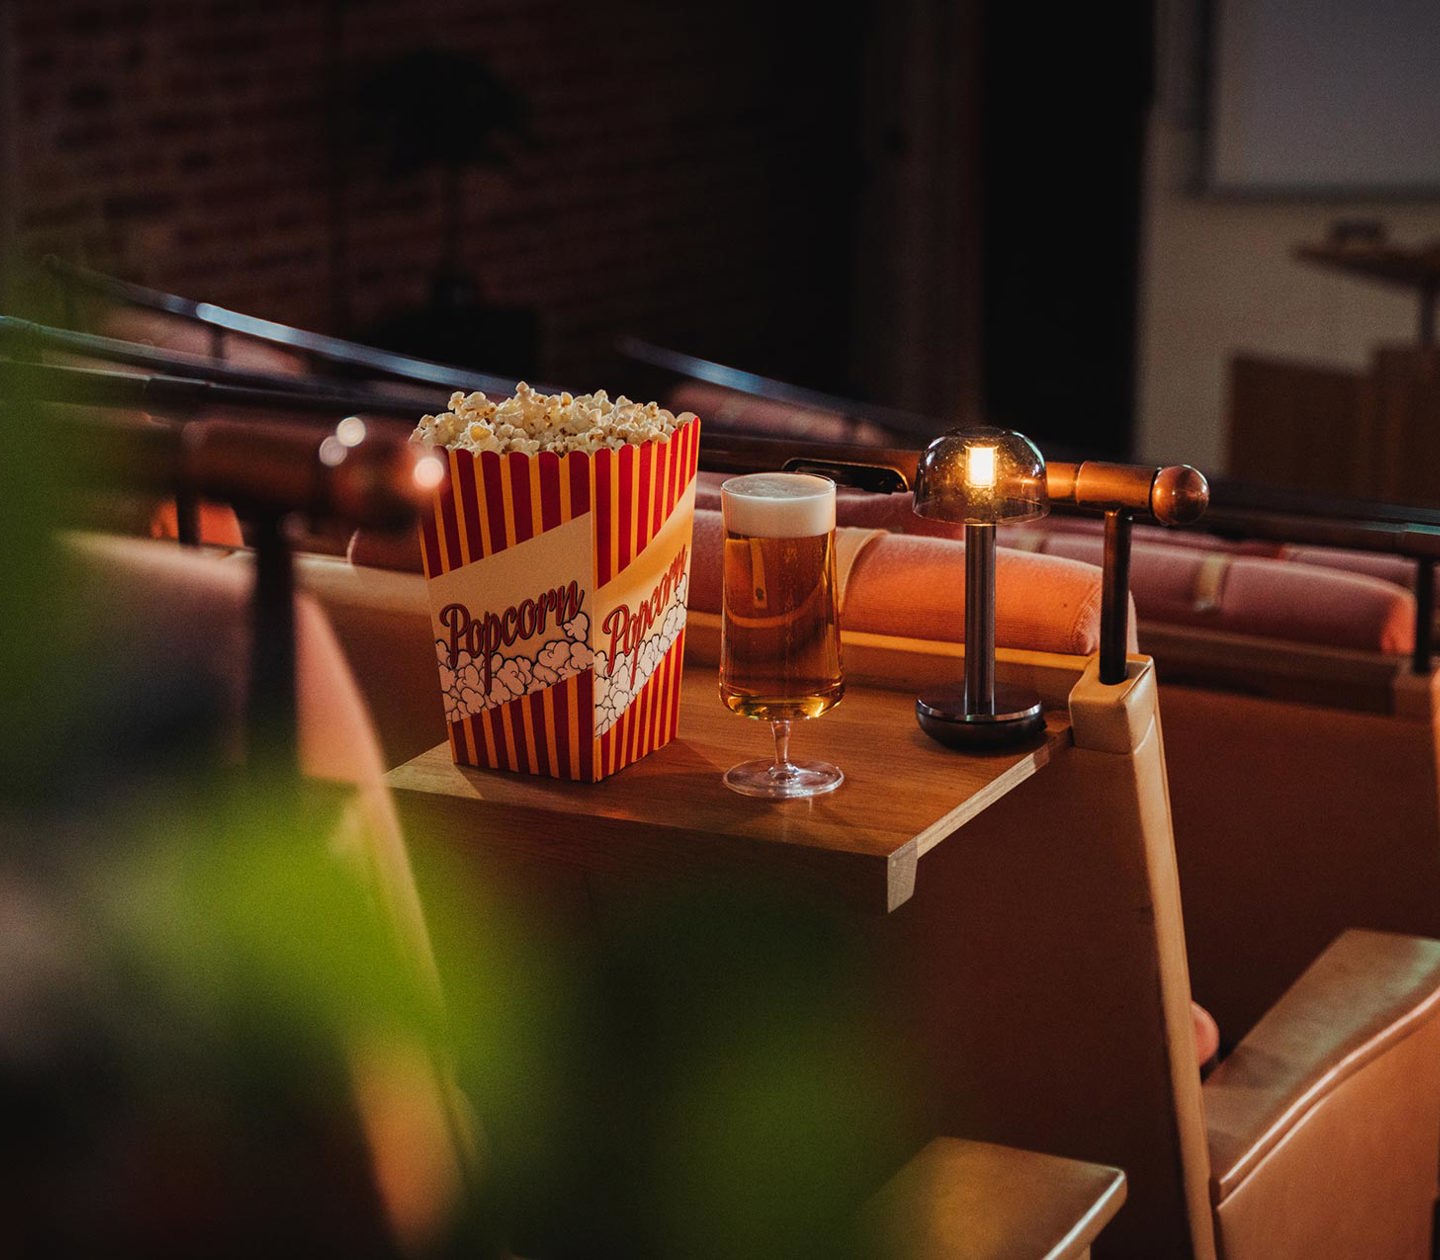 A cinema with popcorn and a beer